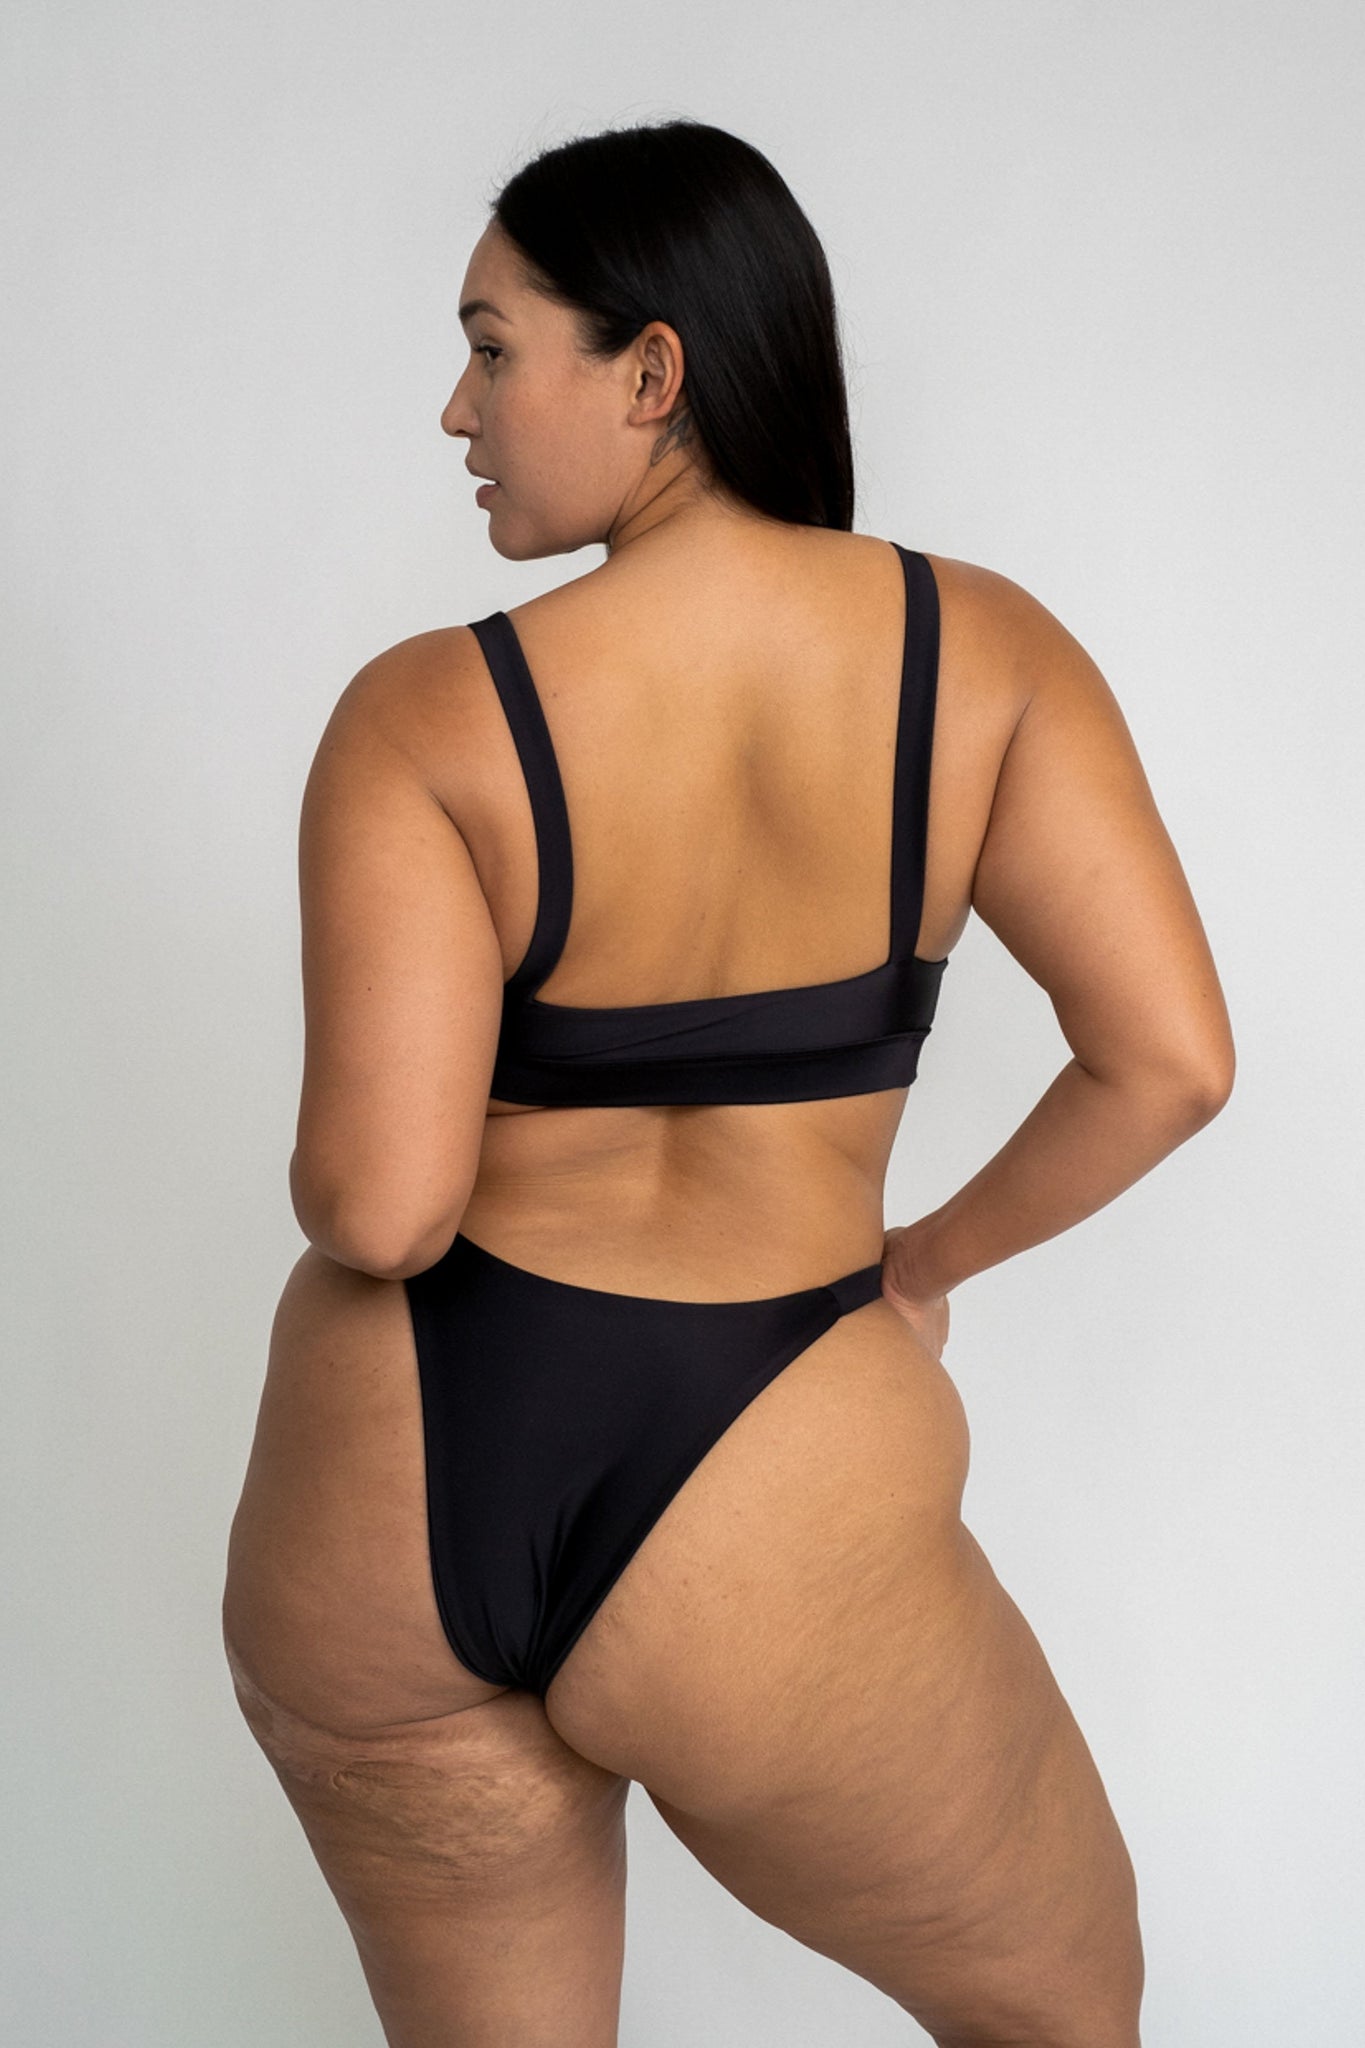 The back of a woman looking to the side wearing black high cut bikini bottoms and a matching black bikini top with thick supportive straps.